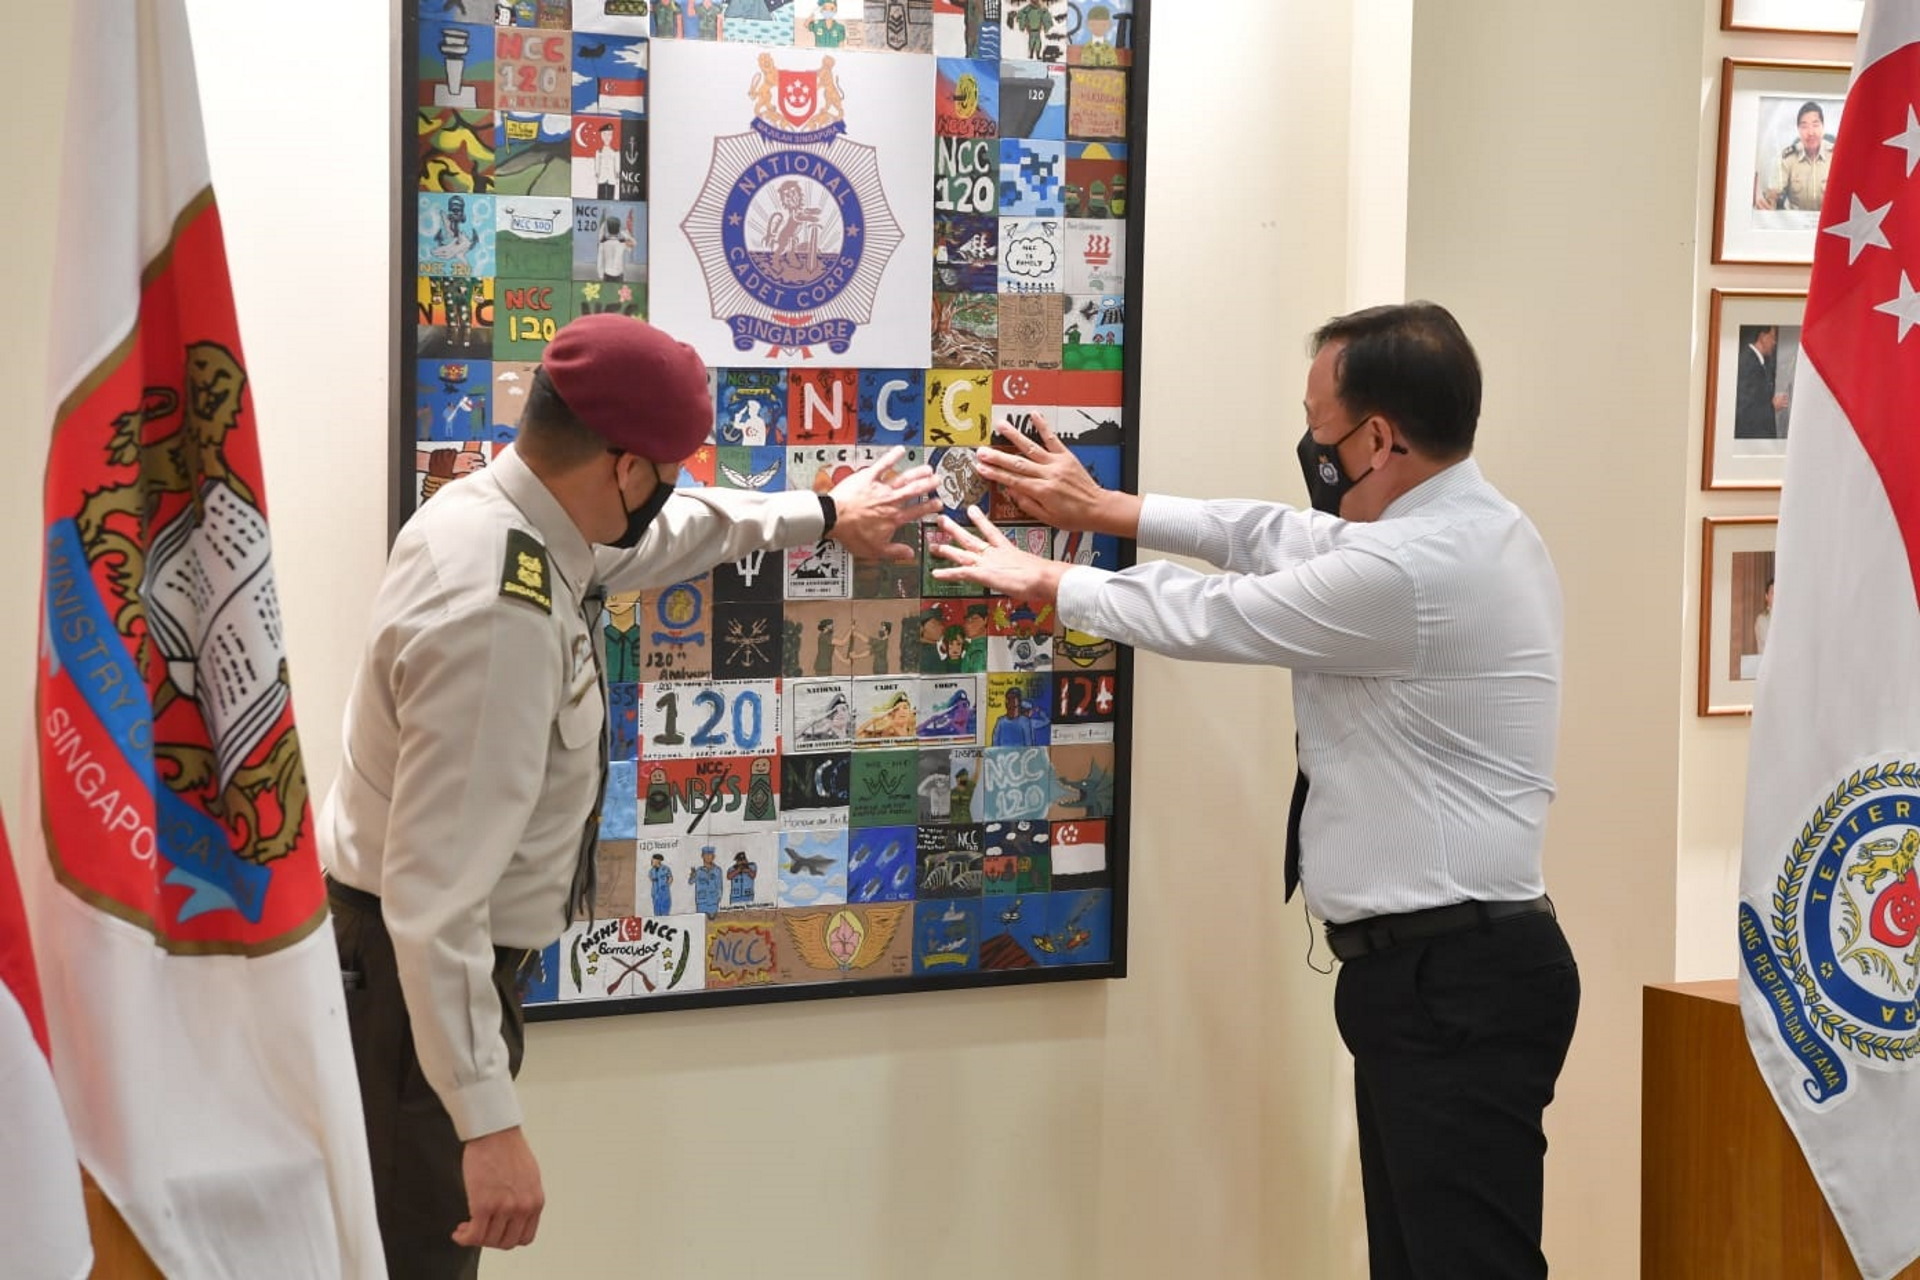 Chairman NCC Council Brigadier-General (NS) Chan Wing Kai (right) laying the final tiles of the Inspiration Mural designed by various NCC units at Amoy Quee Camp for the NCC's 120th Anniversary.